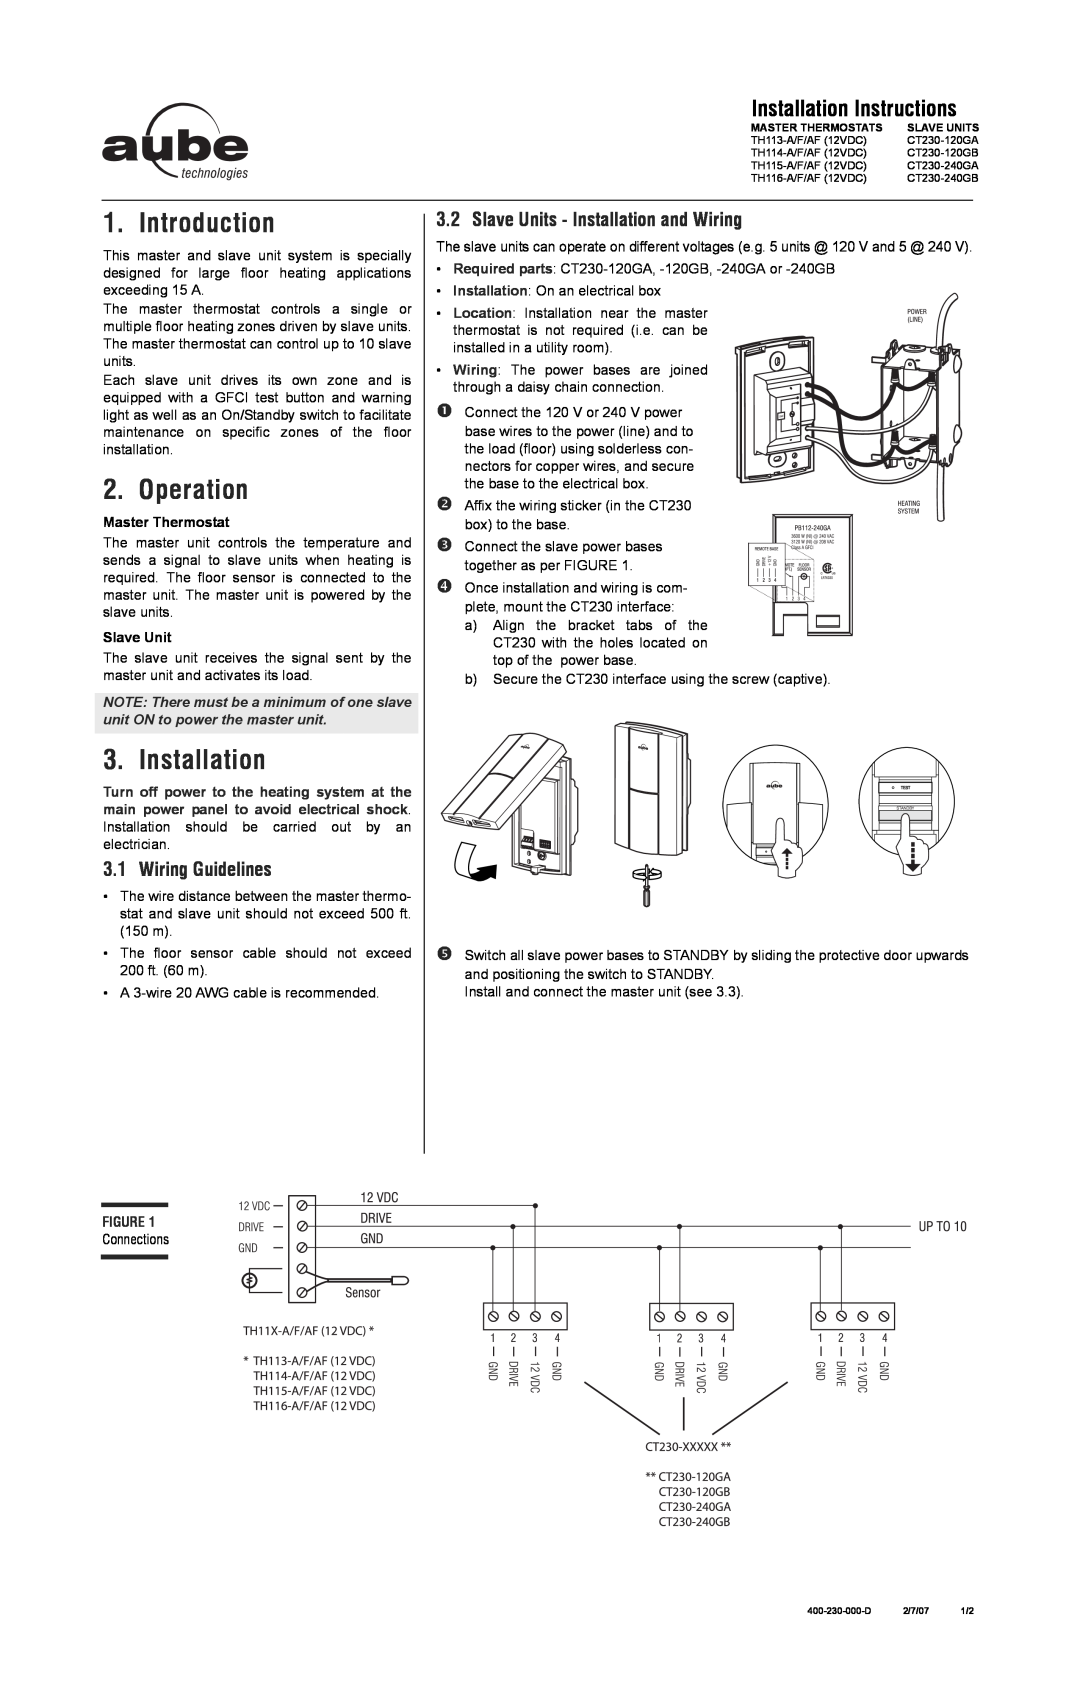 Aube Technologies CT230-120GA installation instructions Introduction, Operation, Installation, Wiring Guidelines 